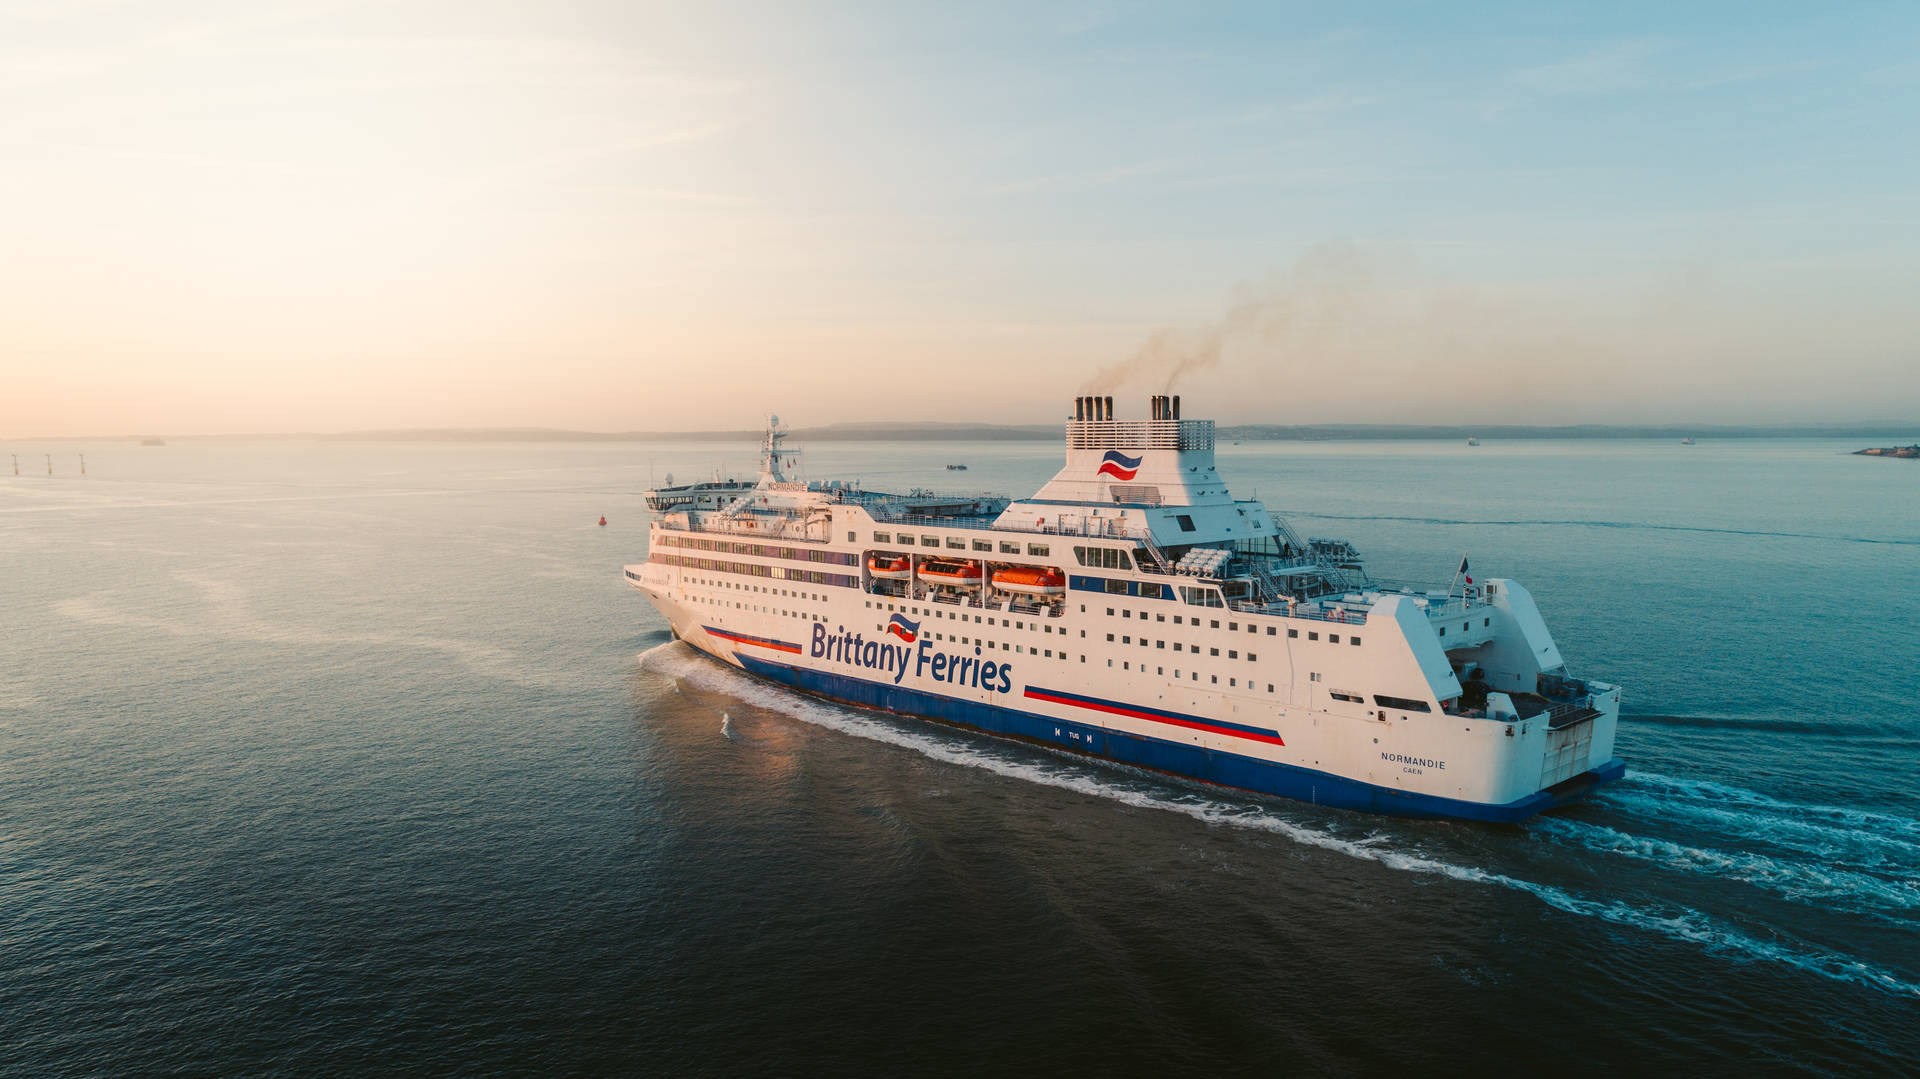 Cruise Ship Brittany Ferries Background